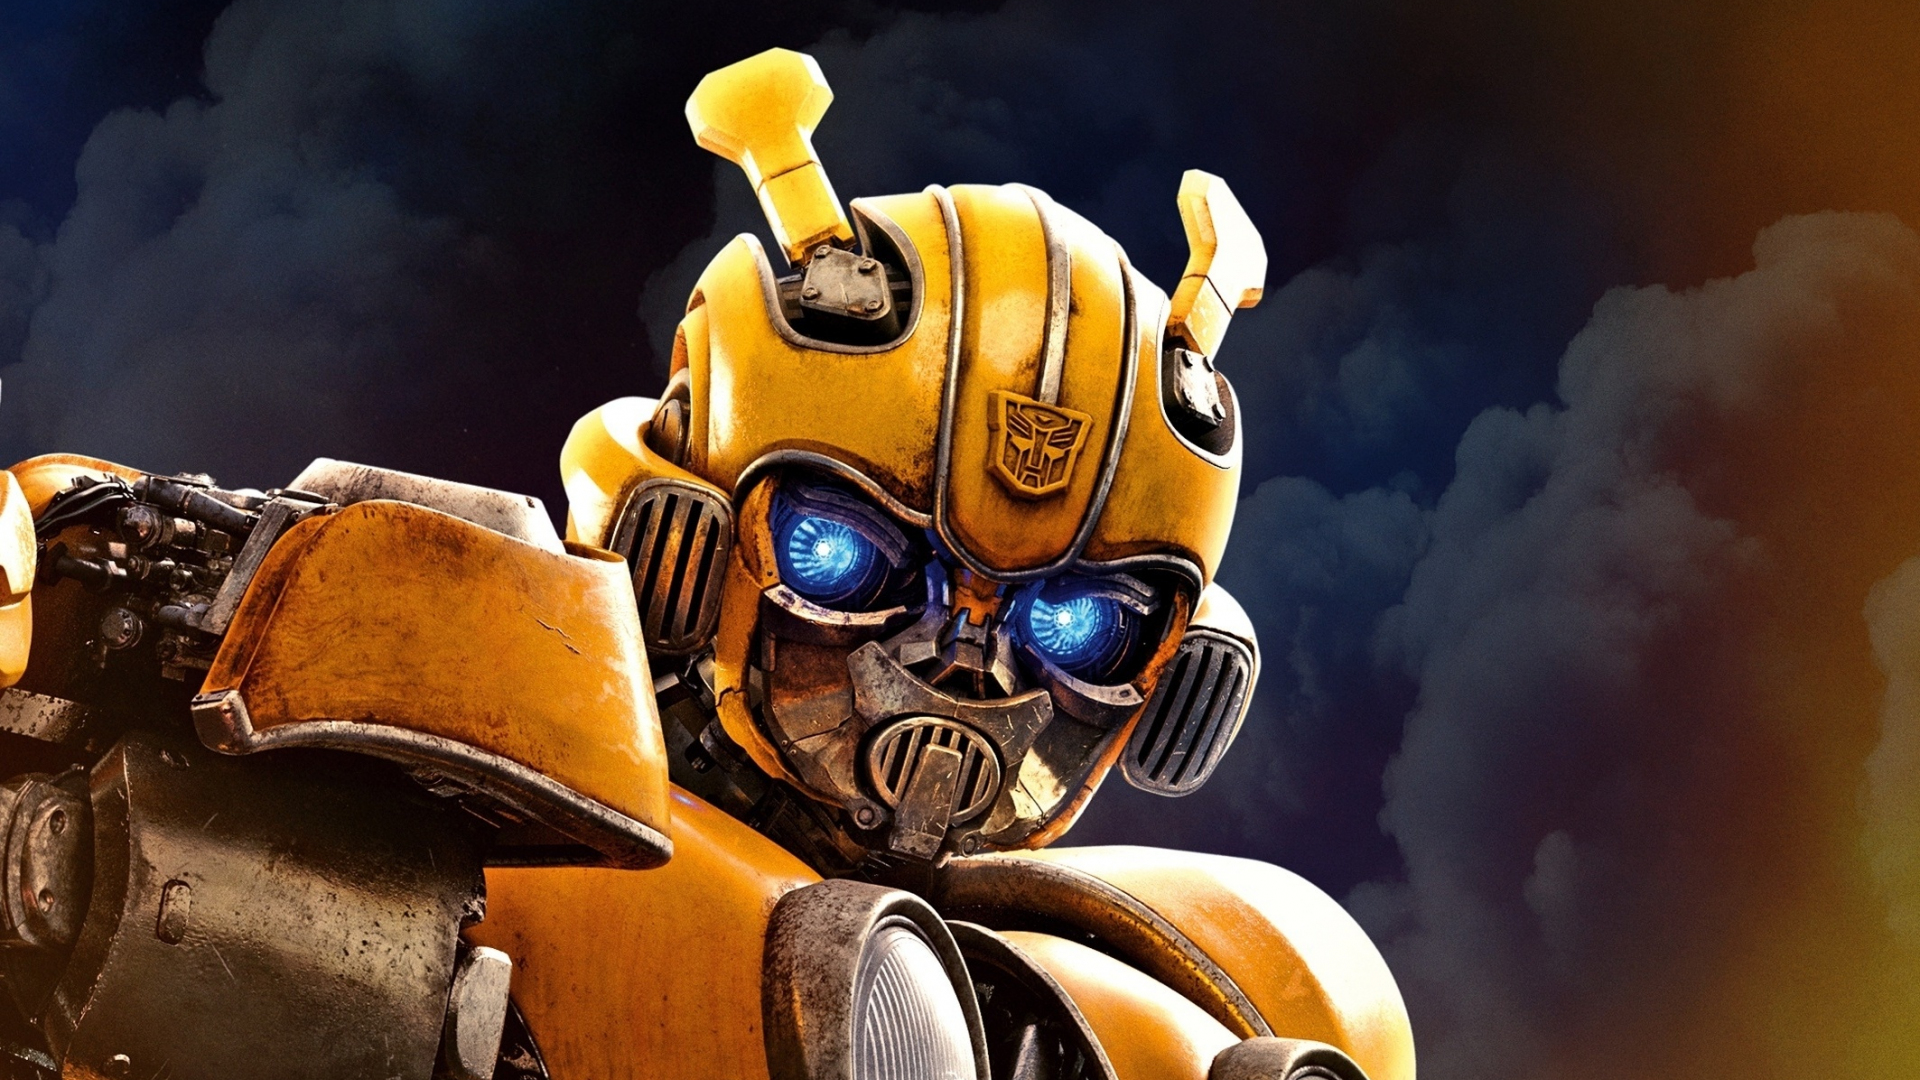 Wallpaper Transformers: Bumblebee, 4K, Movies #20483 - Page 3